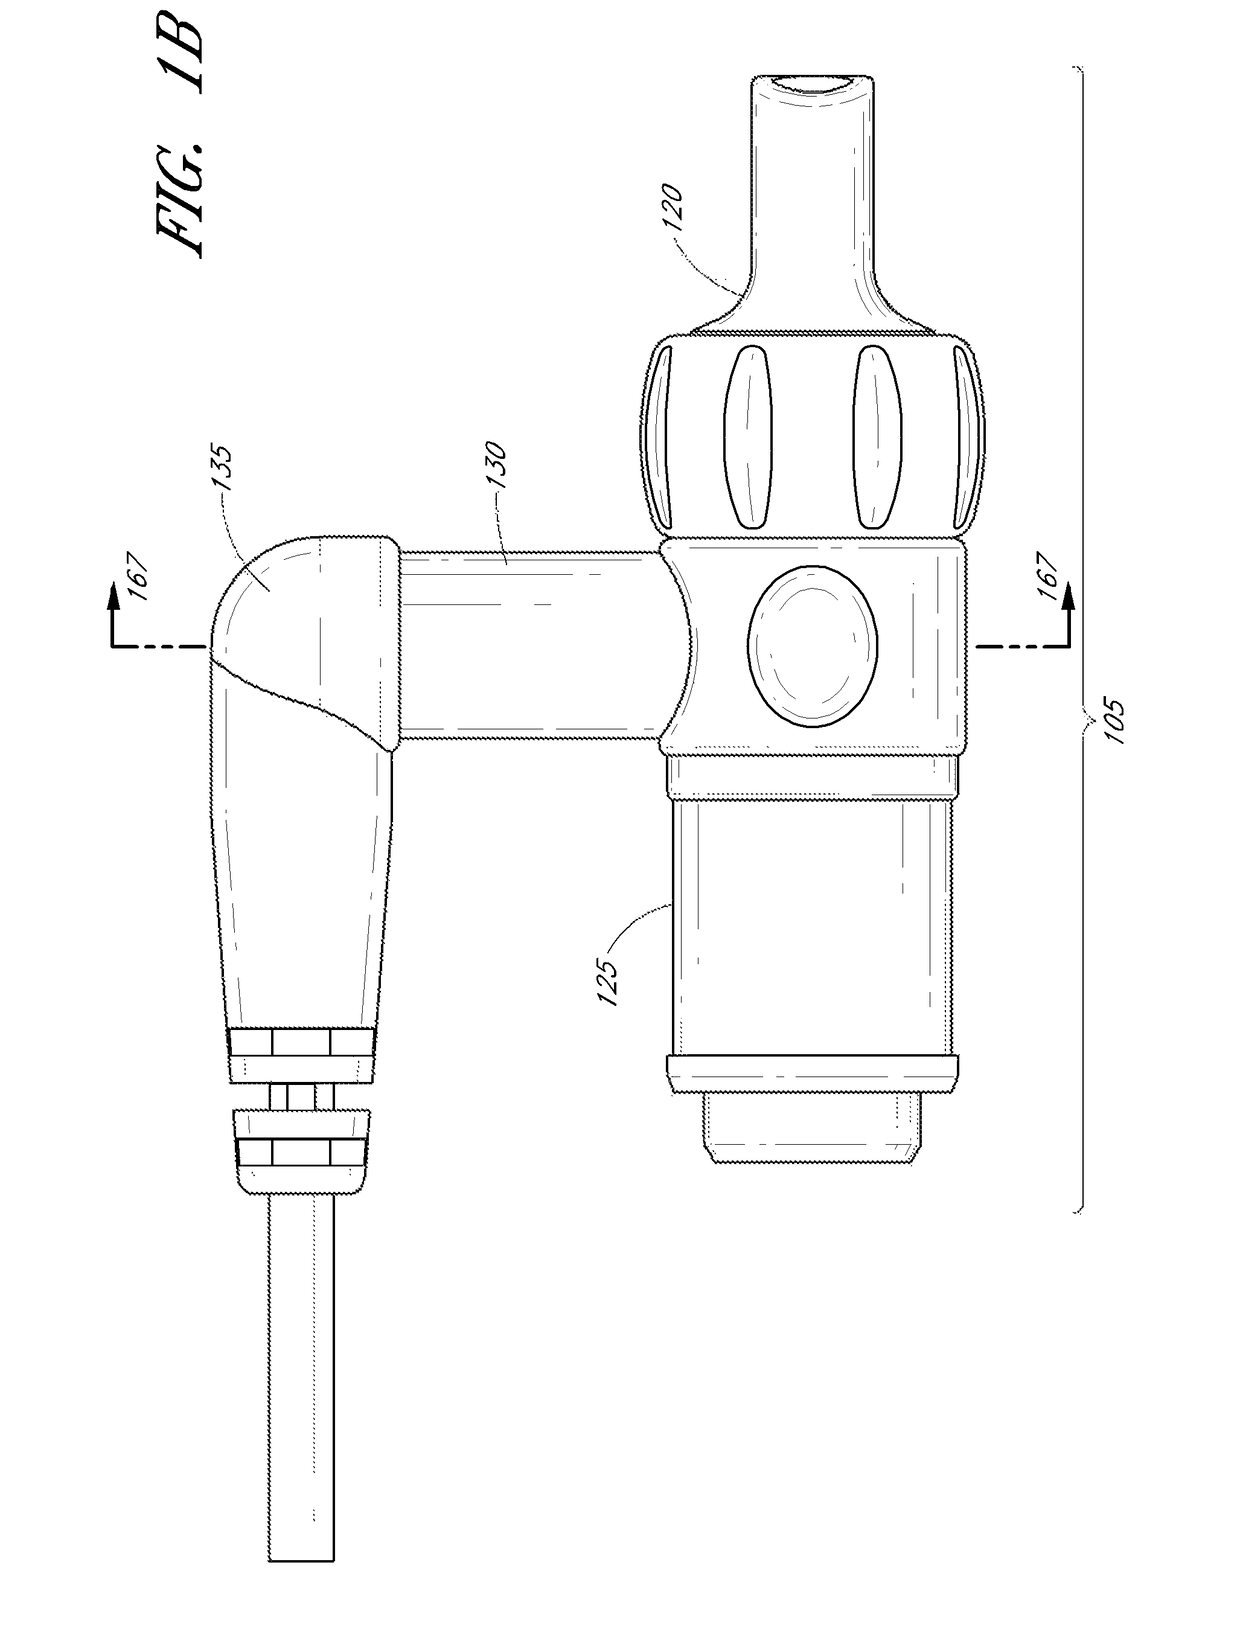 Conduit connector for a patient breathing device